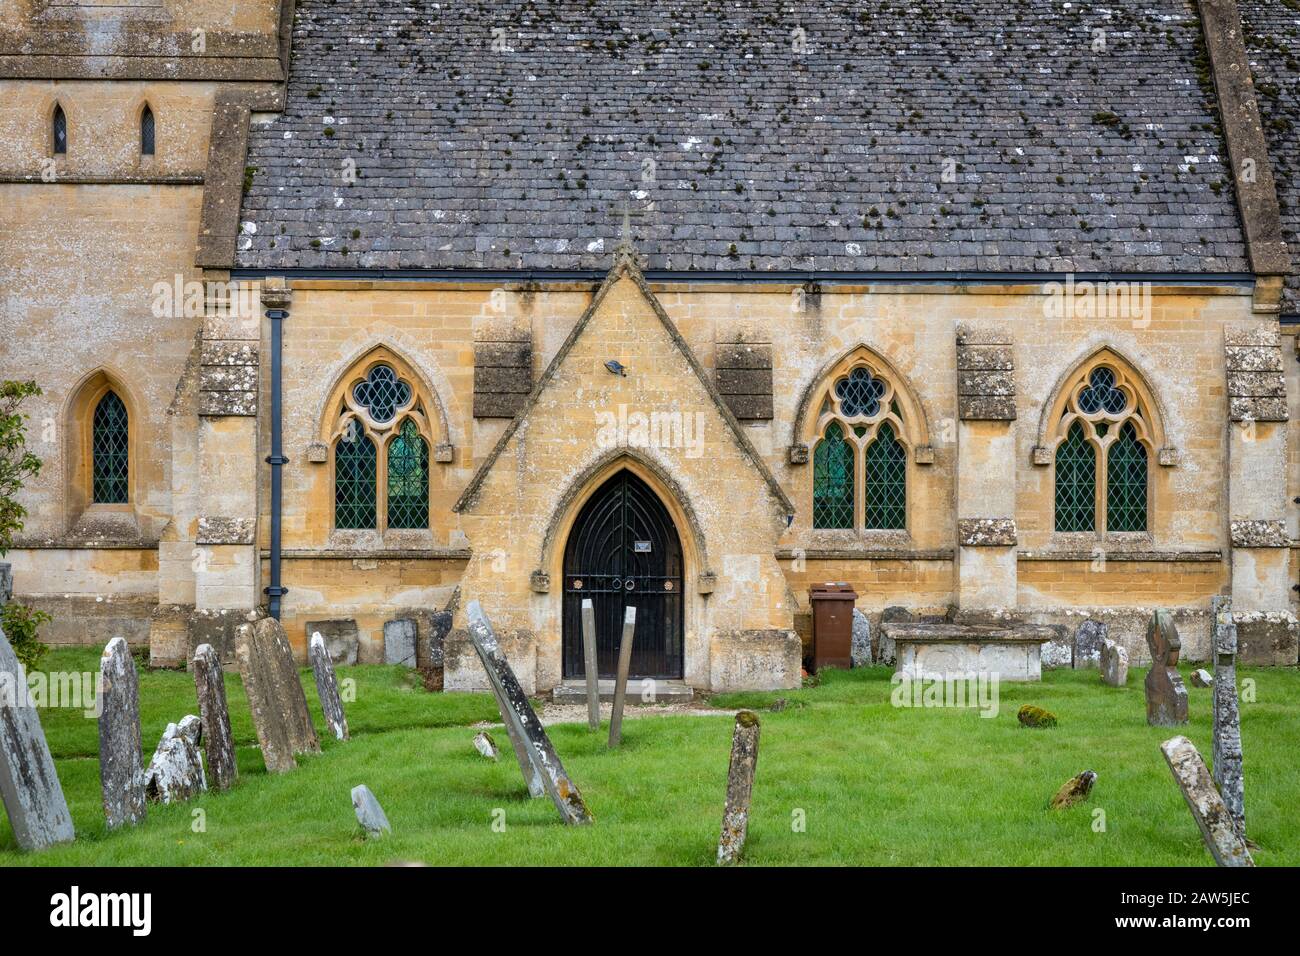 Saint Barnabas Church in the Cotswolds town of Snowshill, Gloucestershire, England, UK Stock Photo